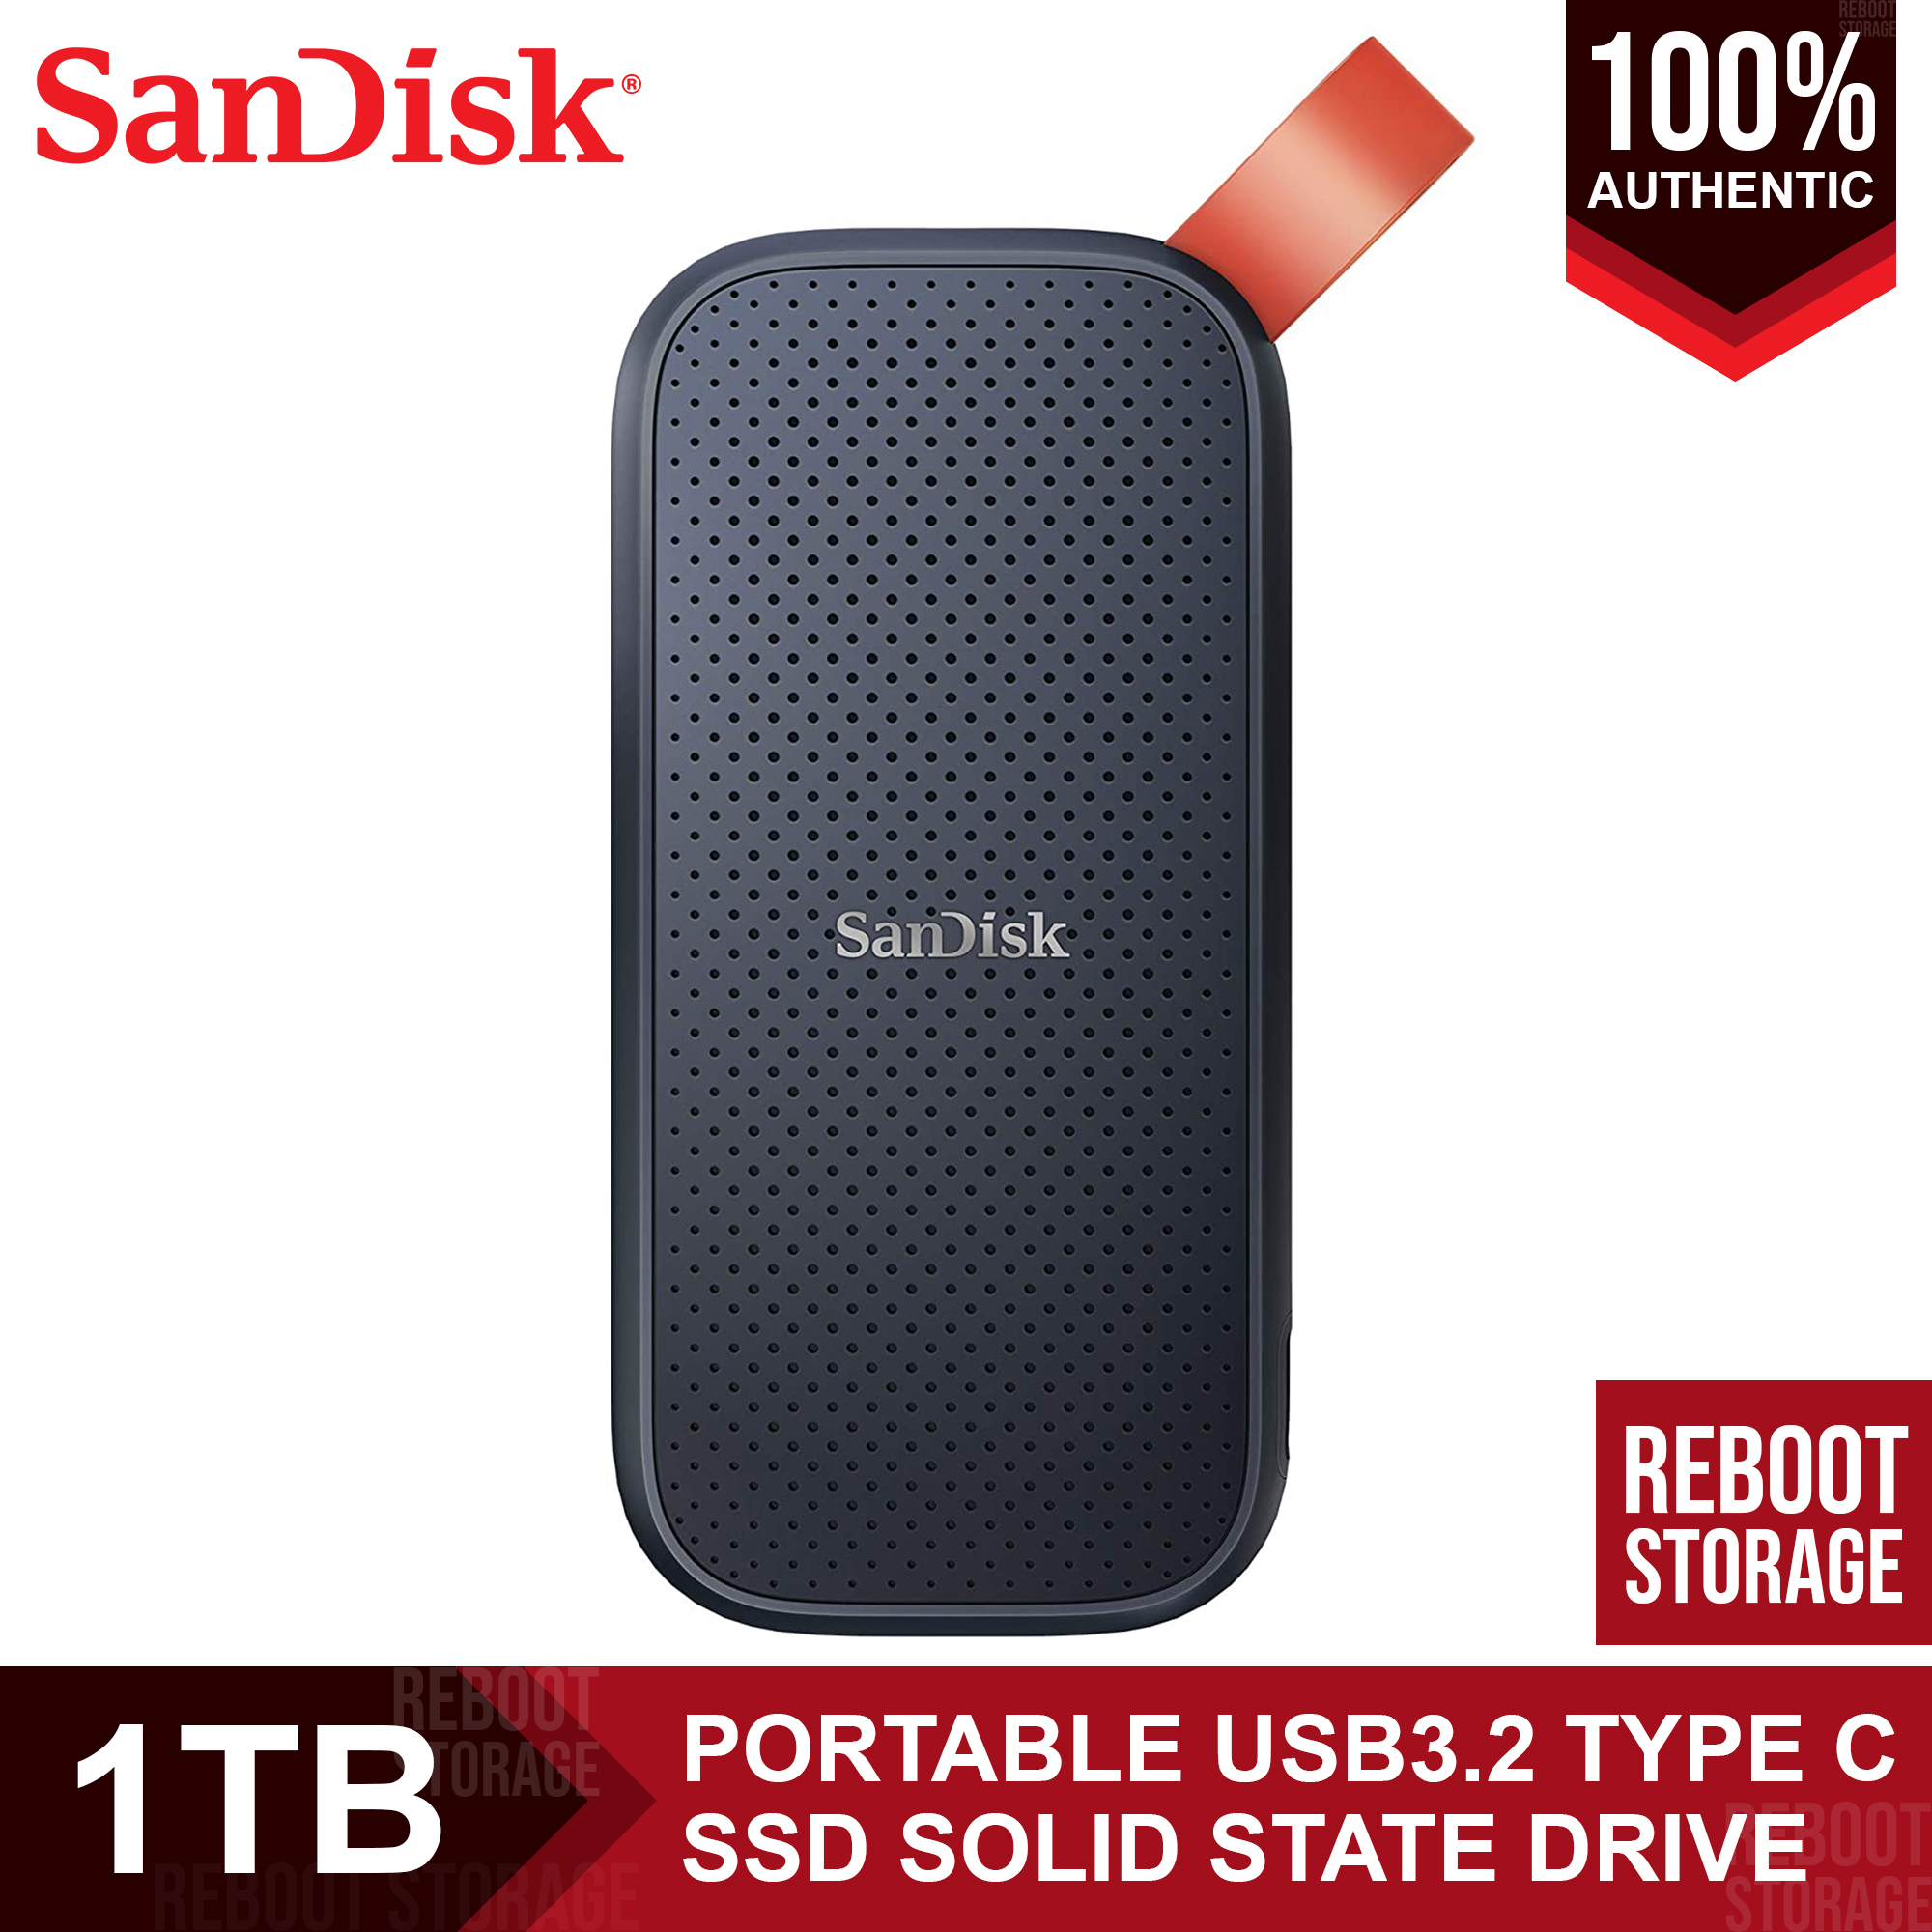 Sandisk Portable 1TB USB 3.2 Type C External SSD Solid State Drive 520MB/s  SDSSDE30-1T Lazada PH